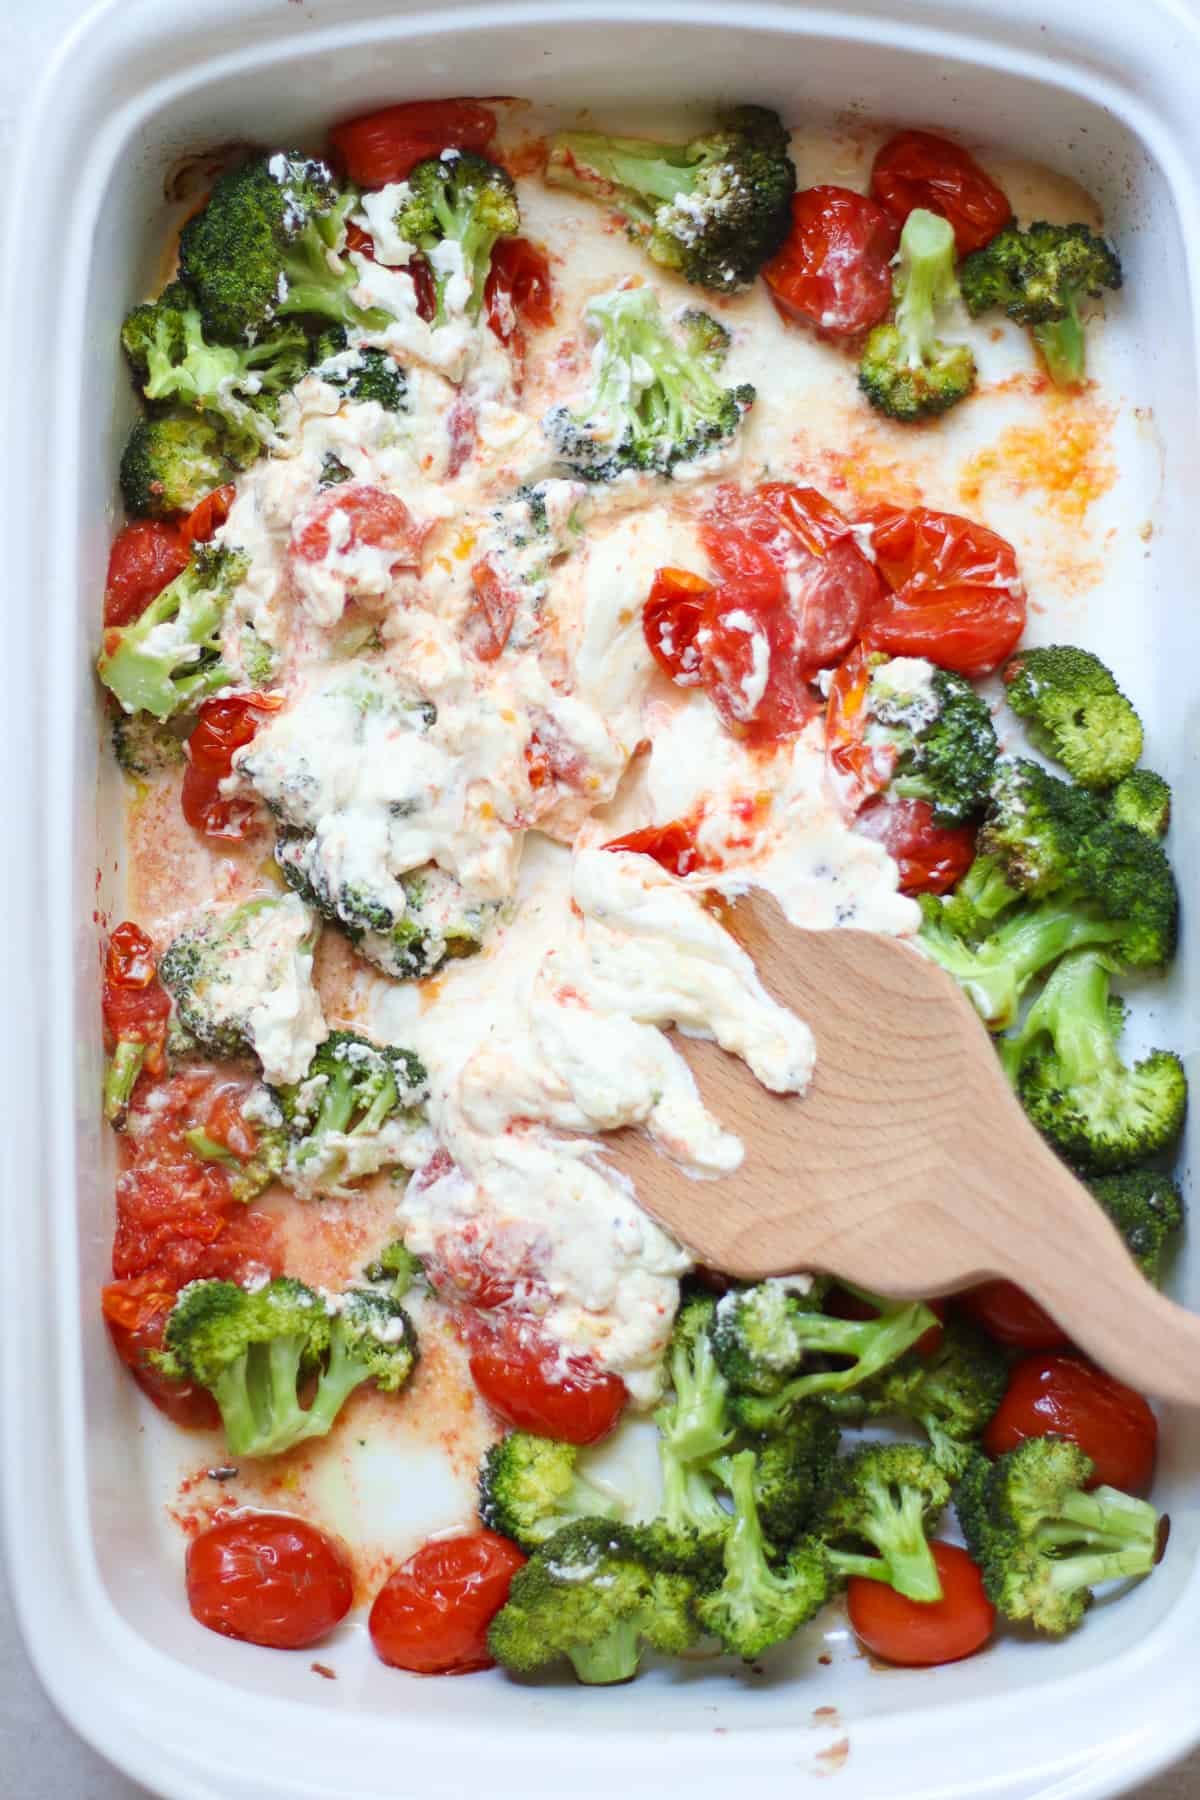 Smashing baked cream cheese with the tomatoes and broccoli.